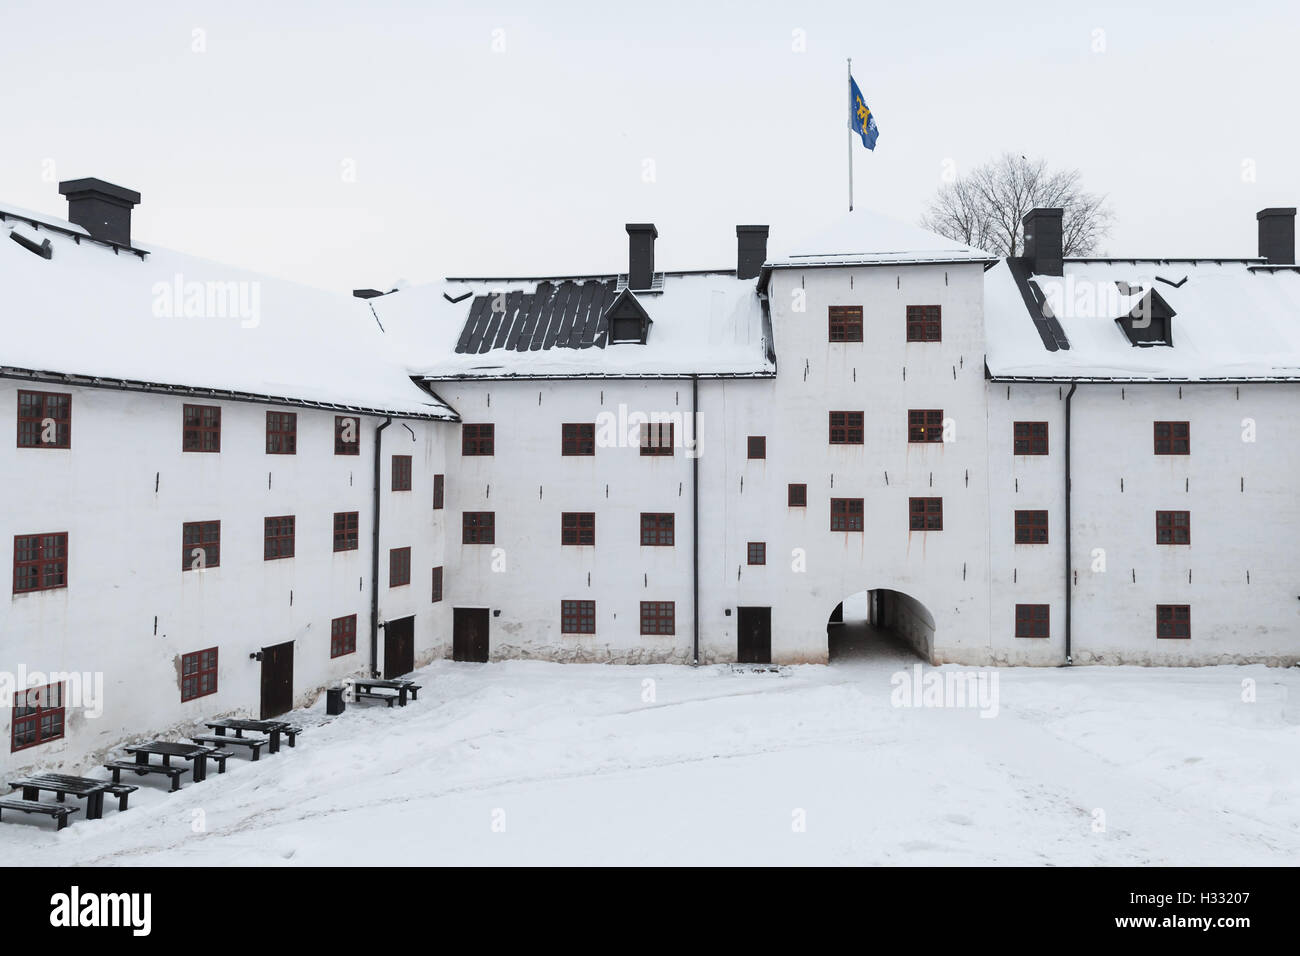 Turku, Finland - January 17, 2016: Facade of Turku castle bailey and inner courtyard in winter day Stock Photo